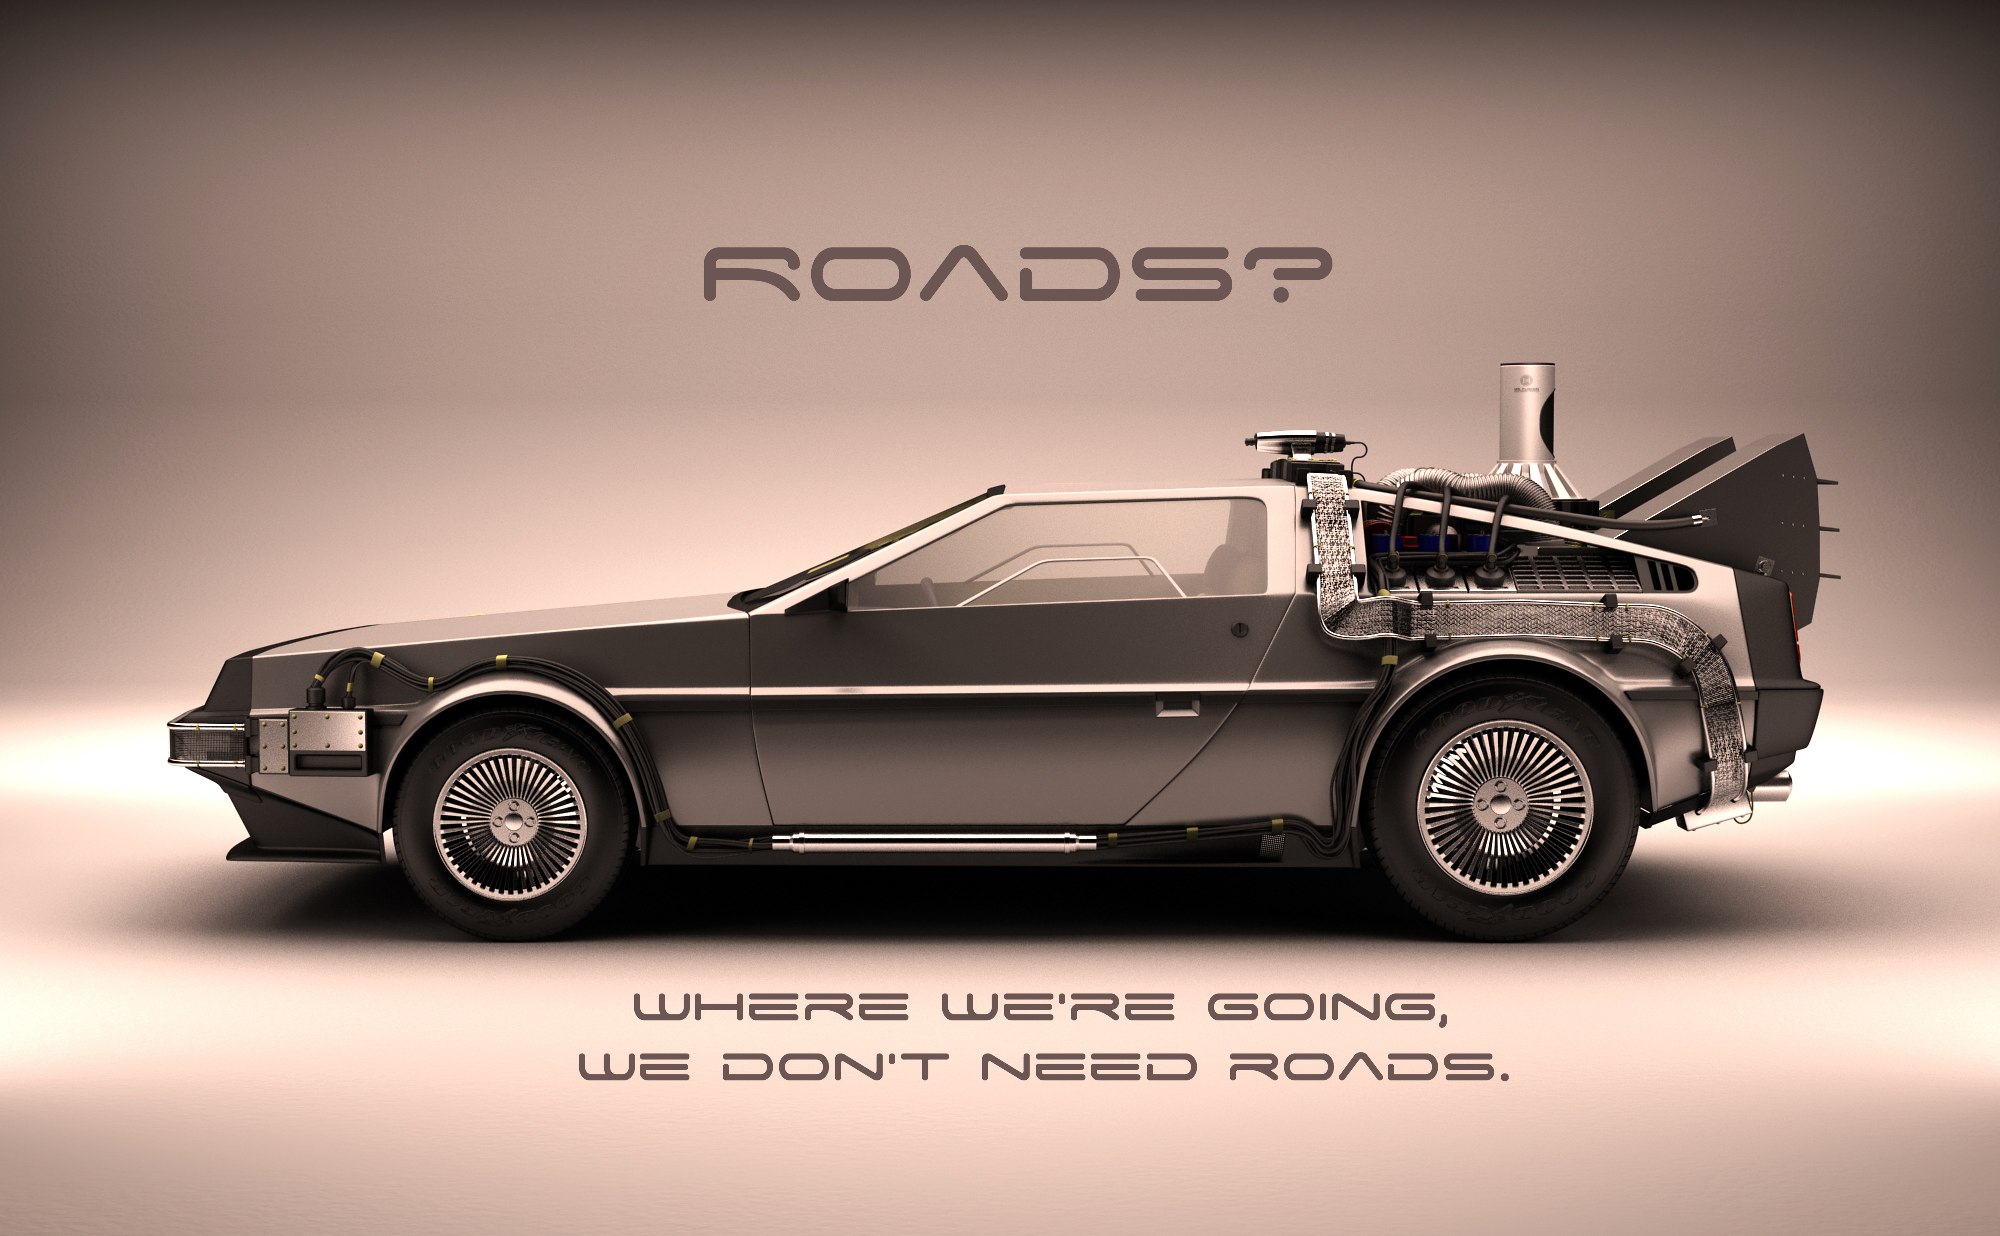 Roads Where We Re Going We Don T Need Roads - HD Wallpaper 